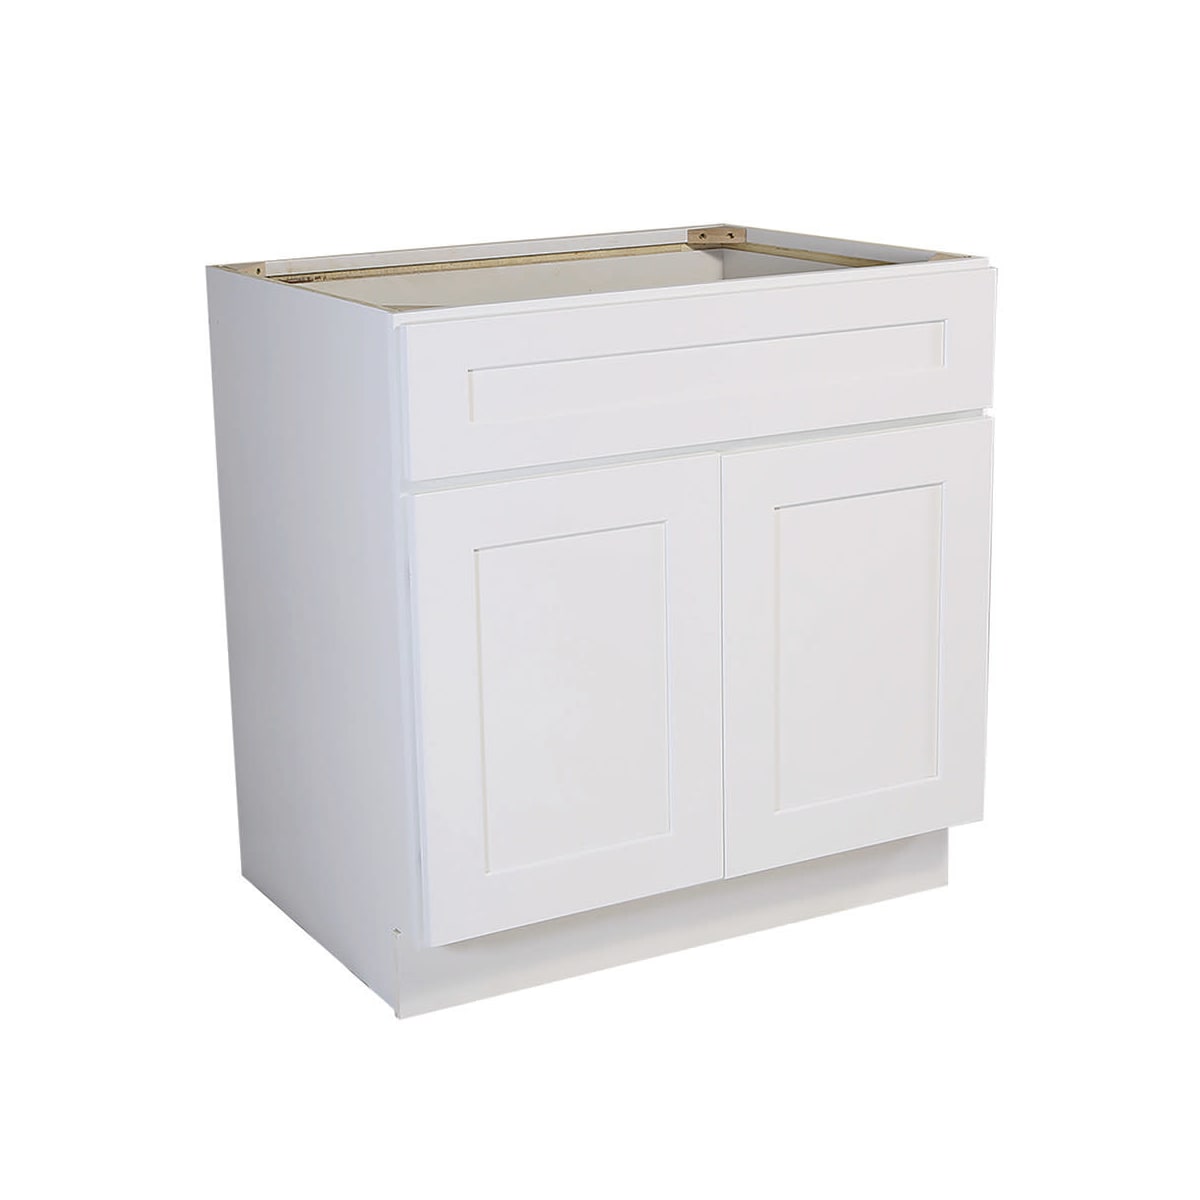 Design House 561506 Brookings 42 Sink Base Cabinet, White